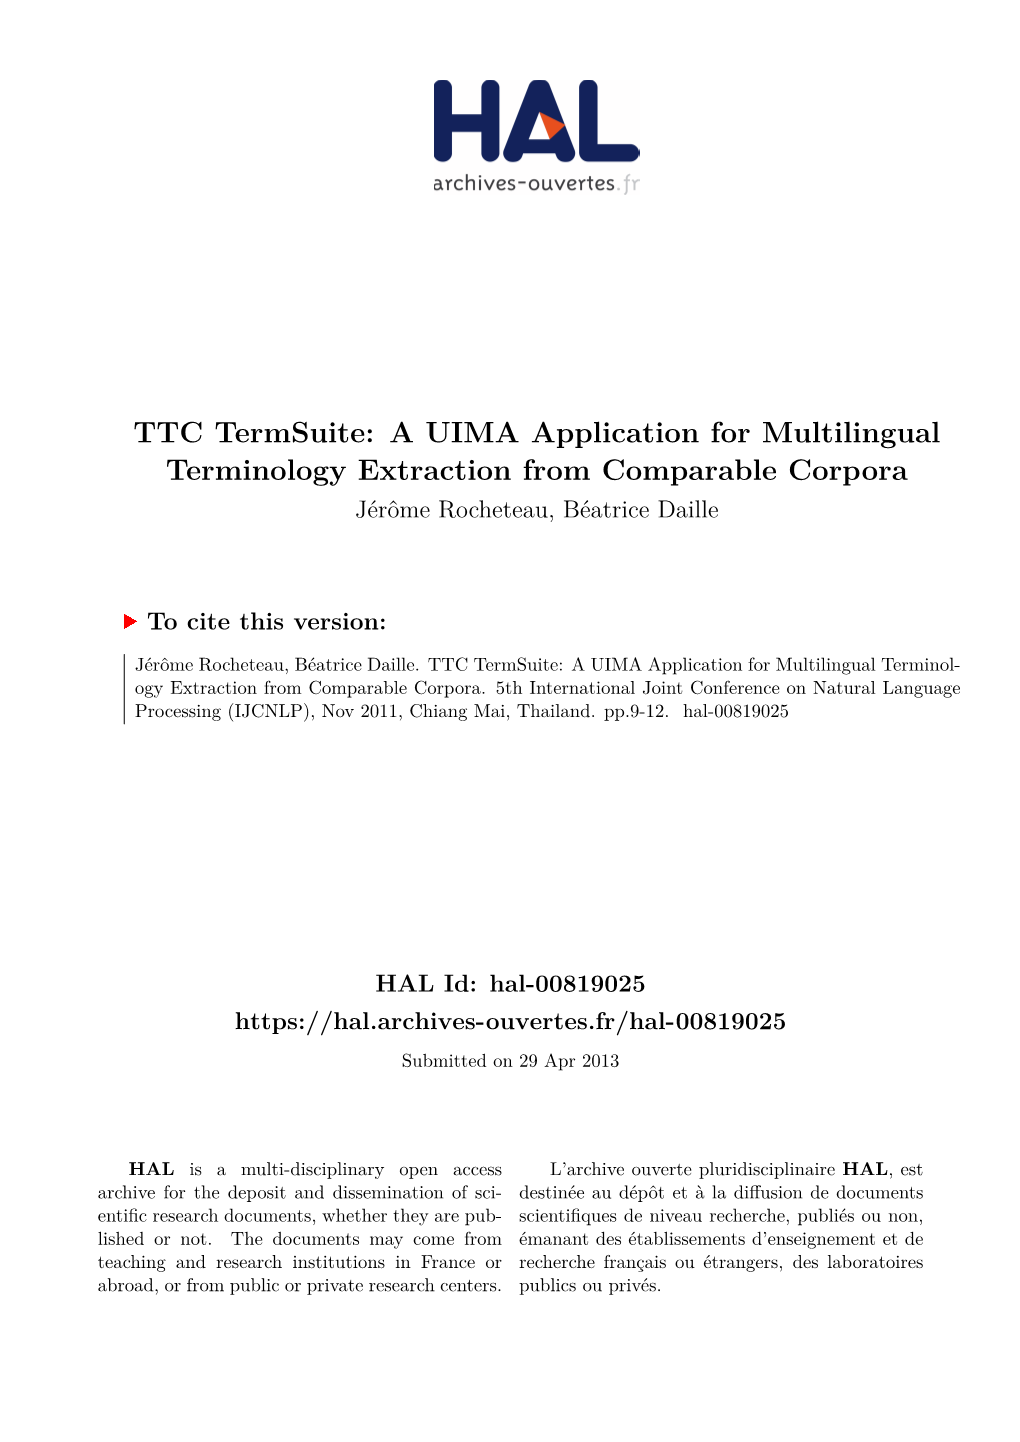 TTC Termsuite: a UIMA Application for Multilingual Terminology Extraction from Comparable Corpora Jérôme Rocheteau, Béatrice Daille